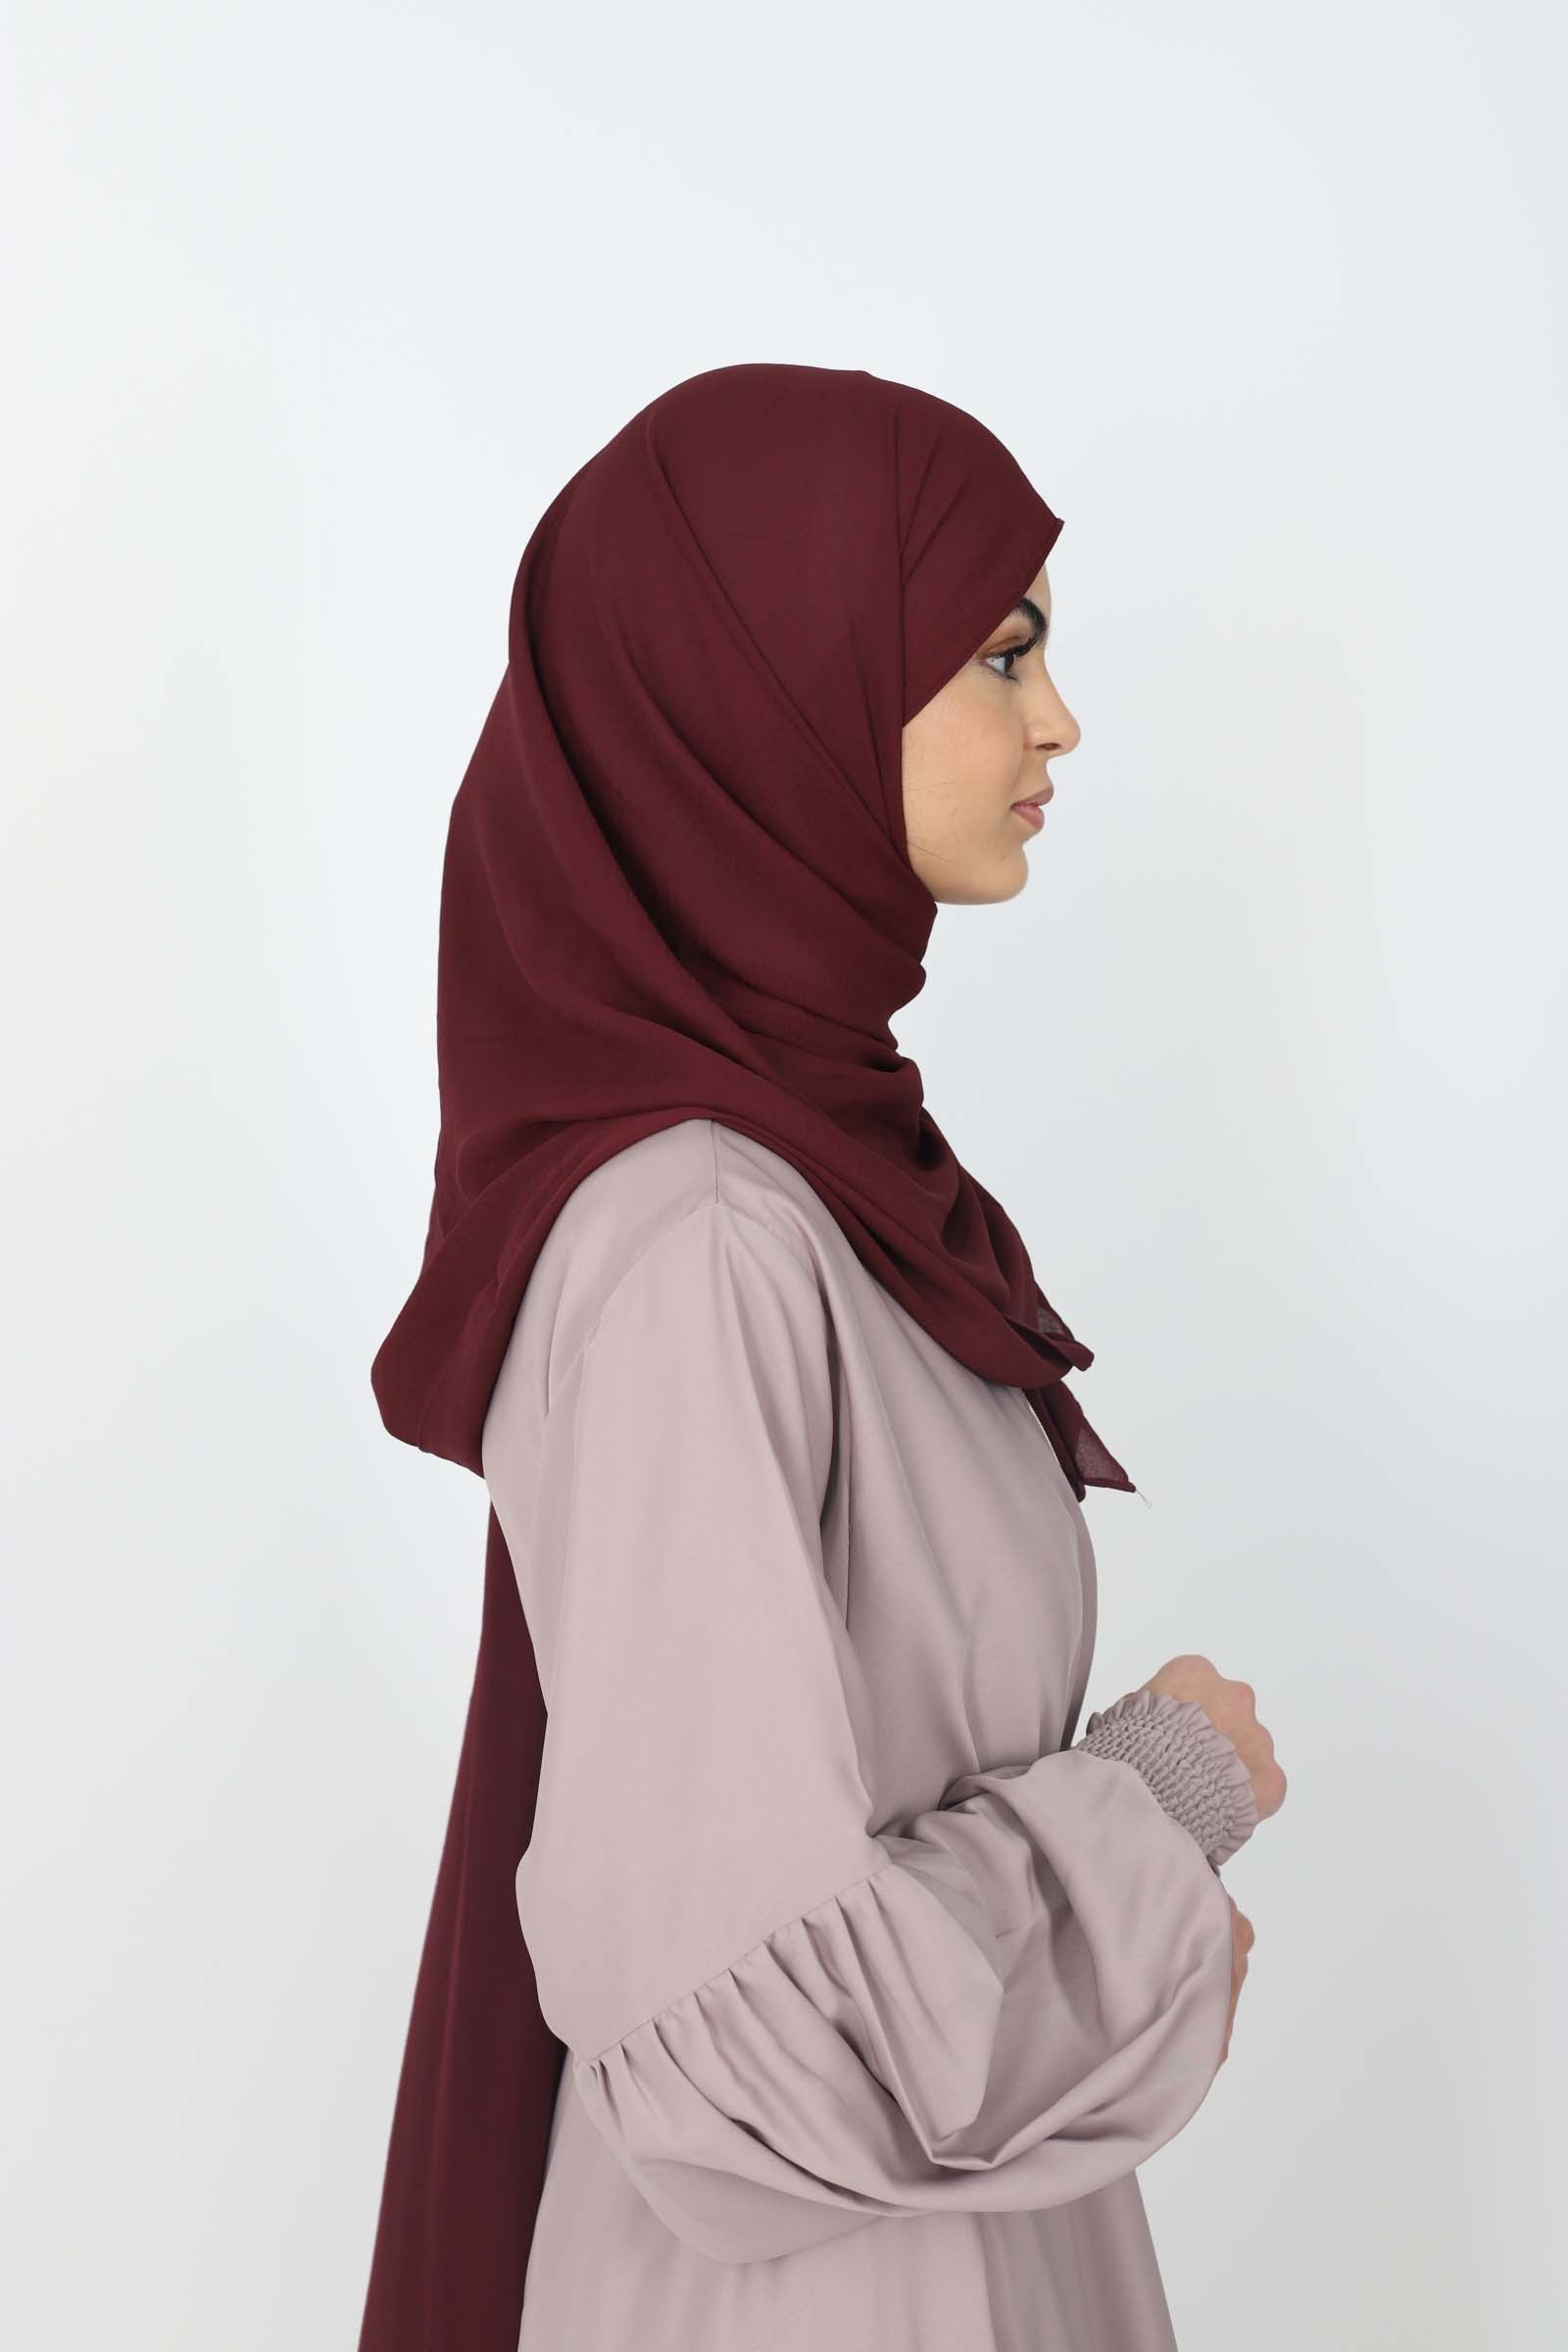 Cheap Muslim woman hijab in jazz fabric for everyday life